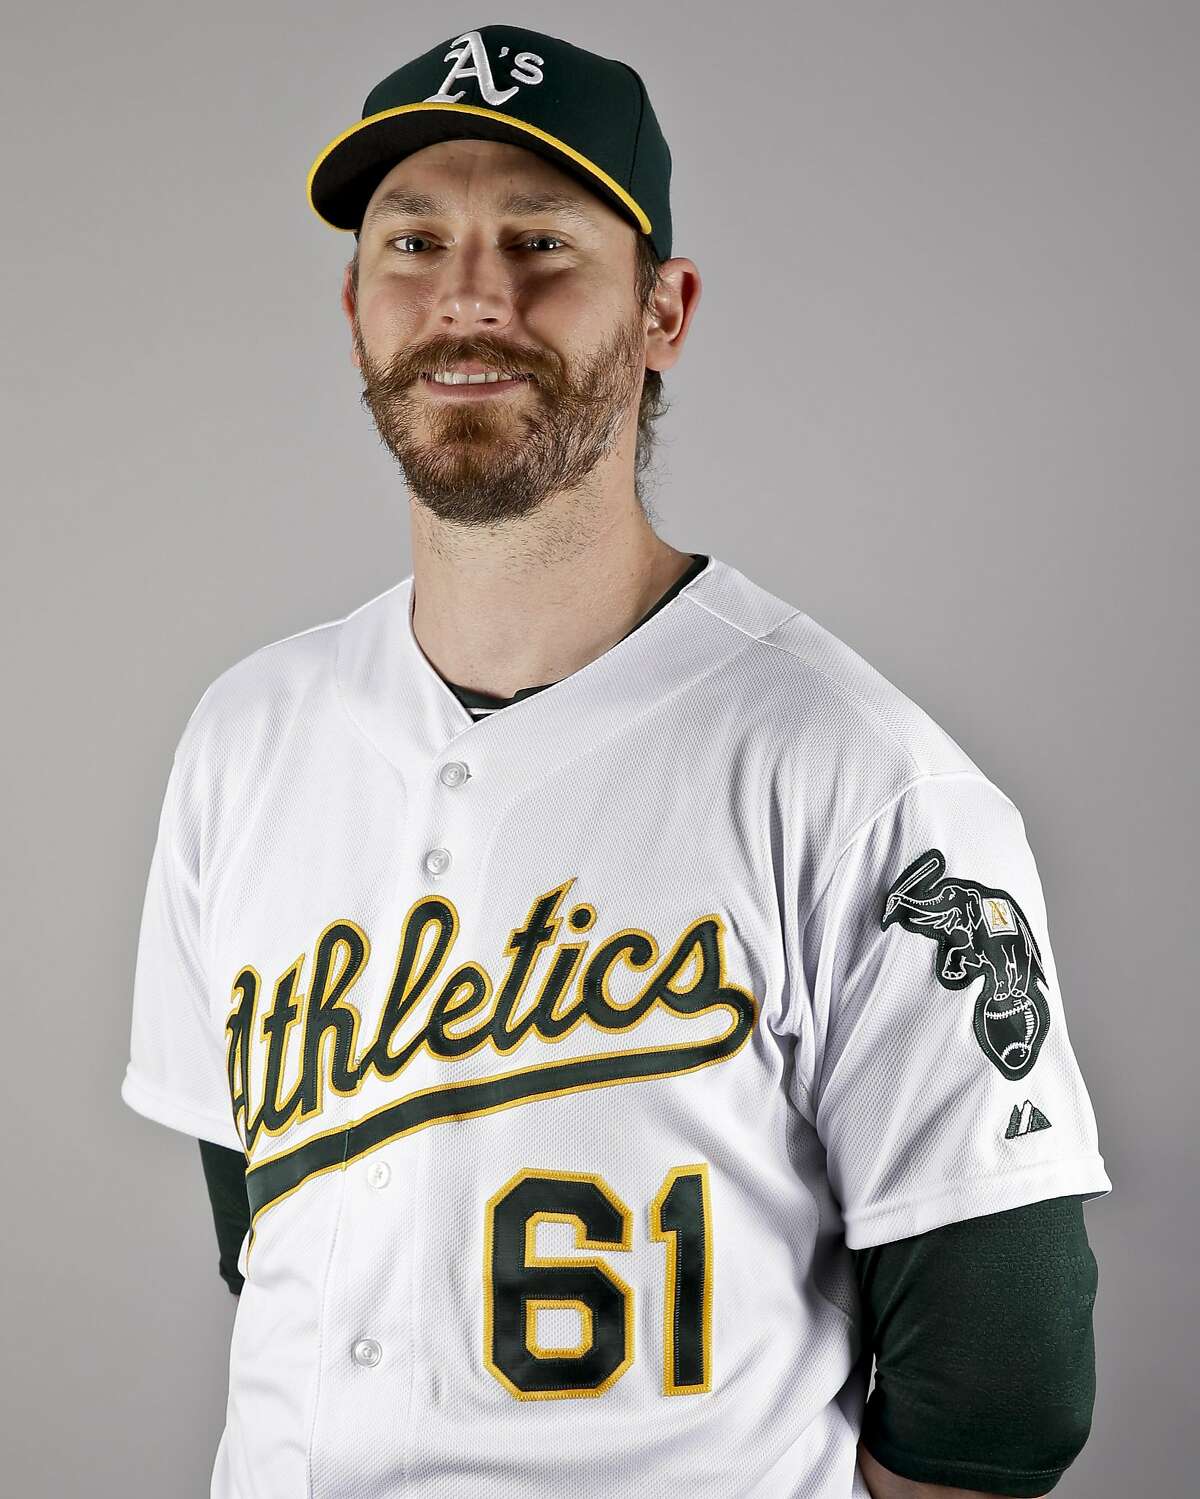 This is a 2016 photo of John Axford of the Oakland Athletics baseball team. This image reflects the Oakland Athletics active roster as of Monday, Feb. 29, 2016, when this image was taken. (AP Photo/Chris Carlson)